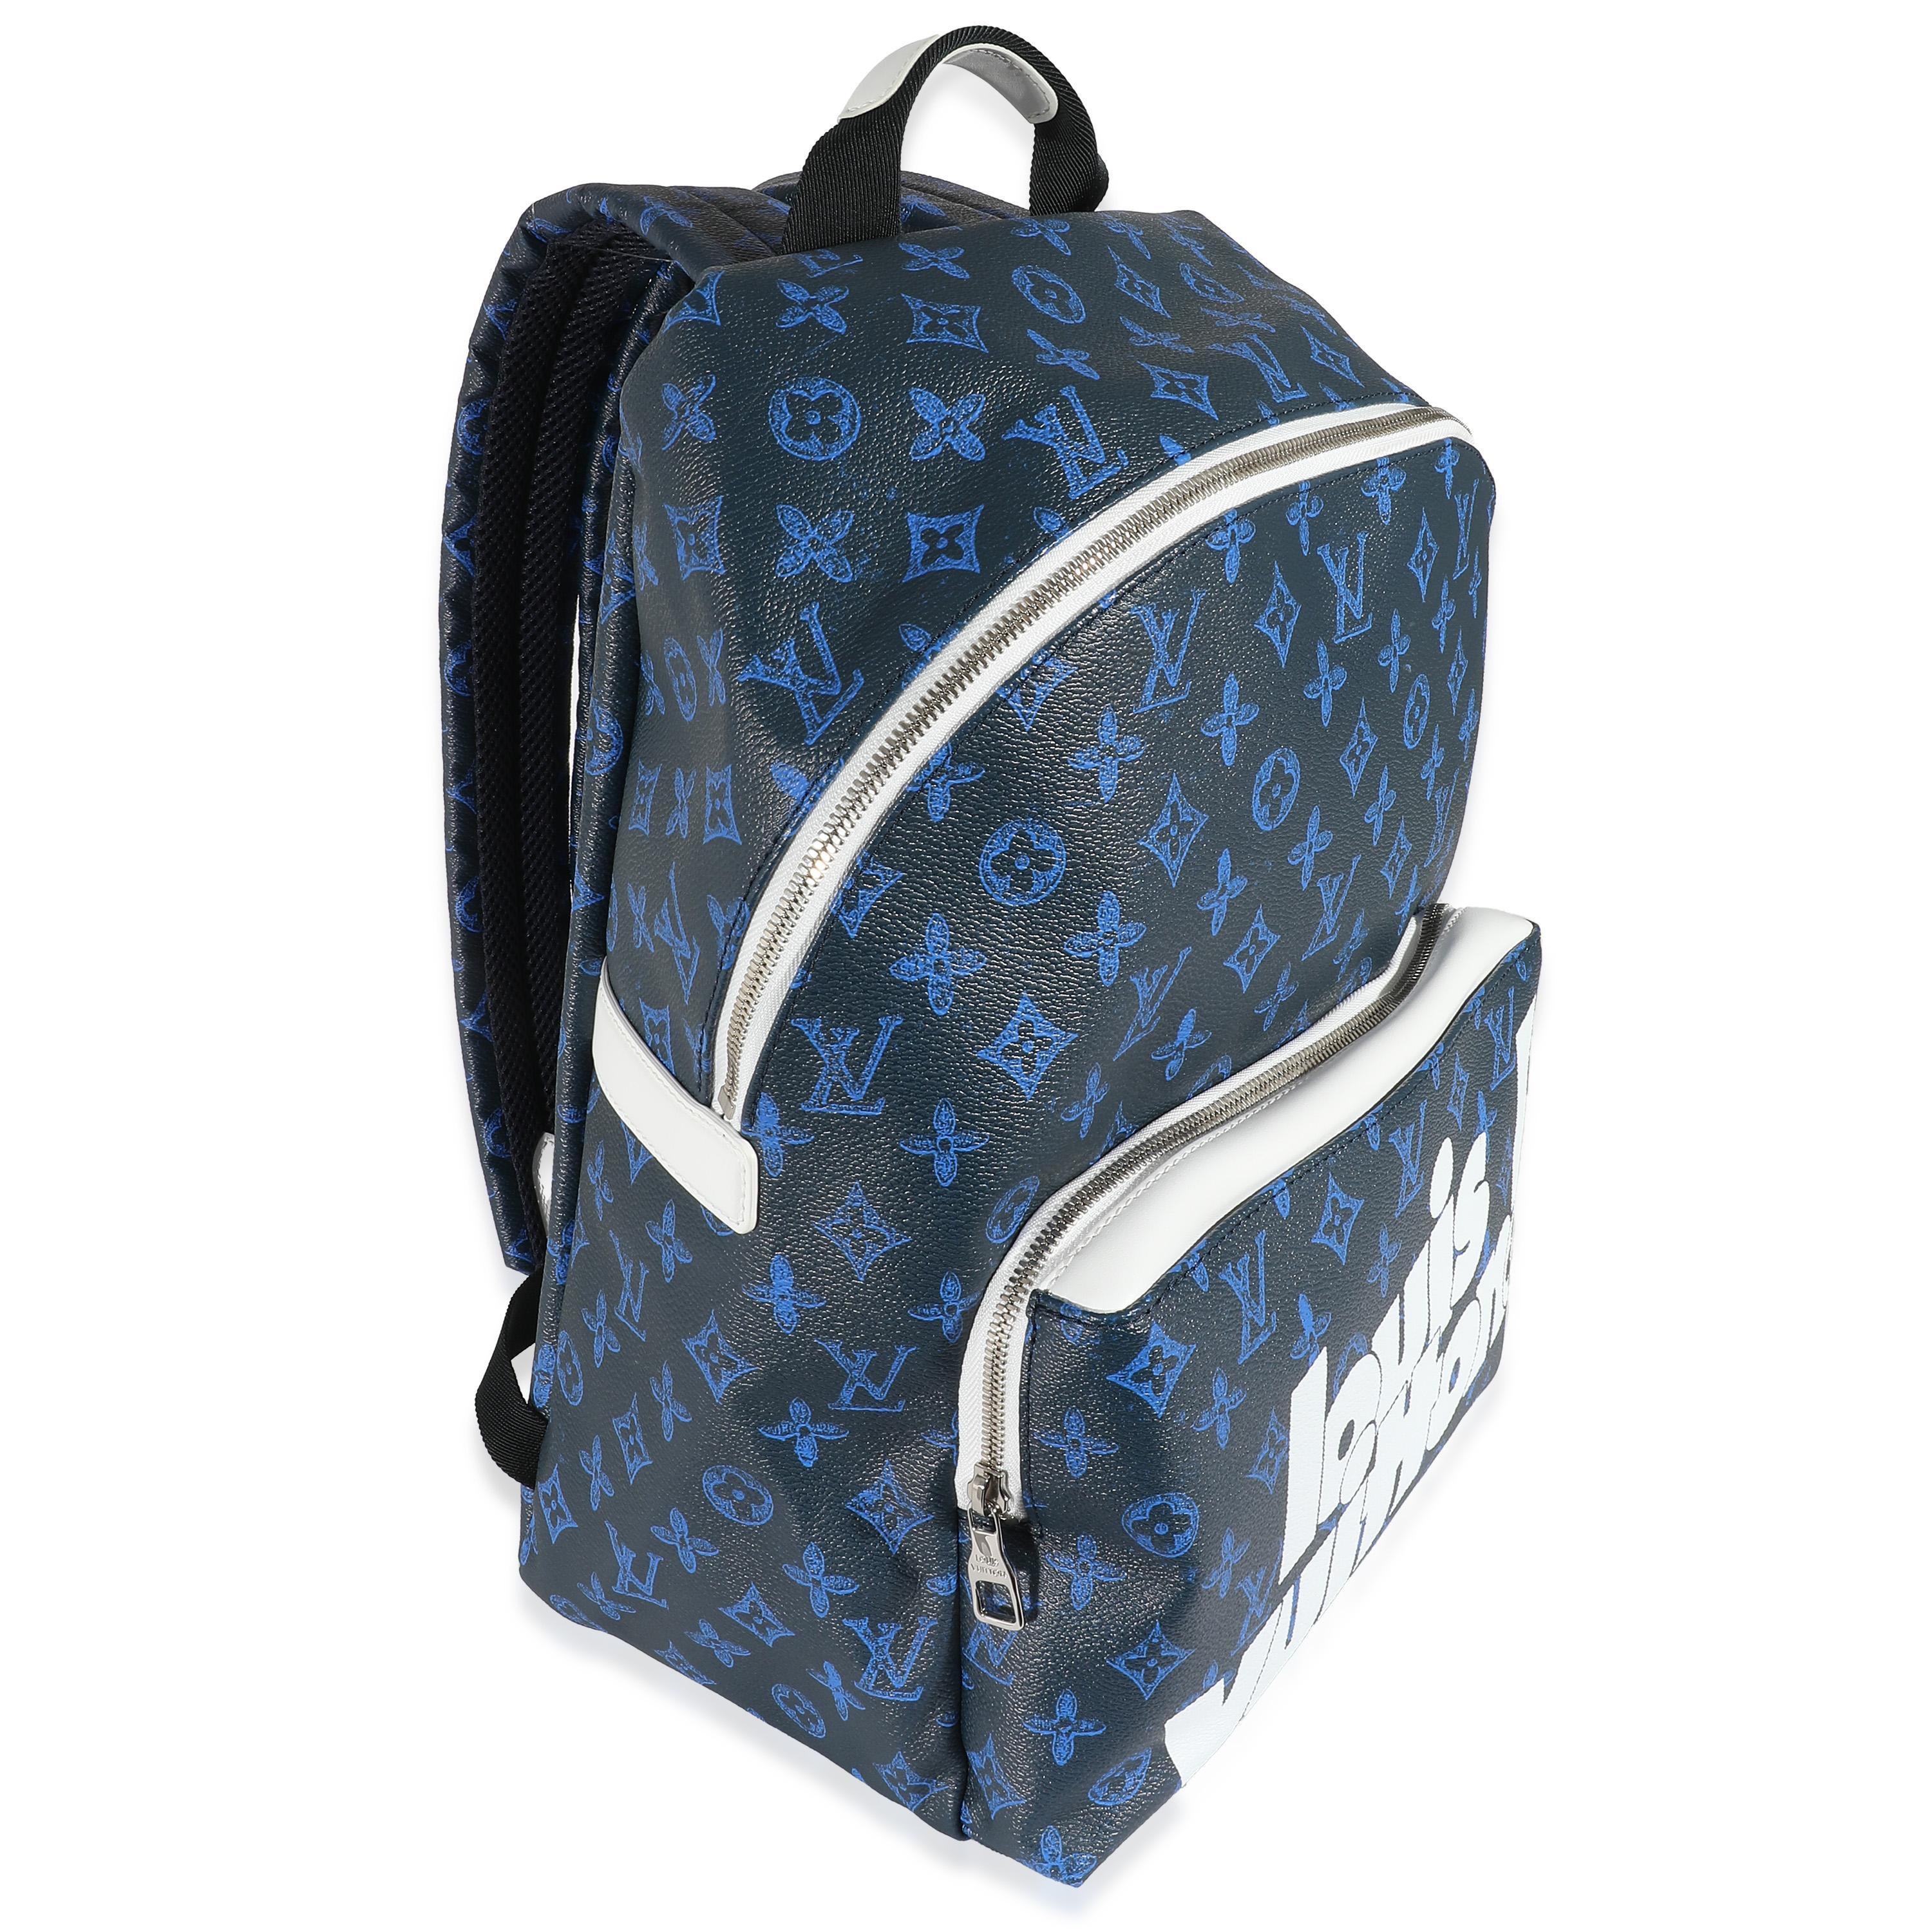 Listing Title: Louis Vuitton Blue Monogram Canvas Everyday Discovery Backpack
SKU: 135553
Condition: Pre-owned 
Handbag Condition: Very Good
Condition Comments: Item is in very good condition with minor signs of wear. Mild peeling at base